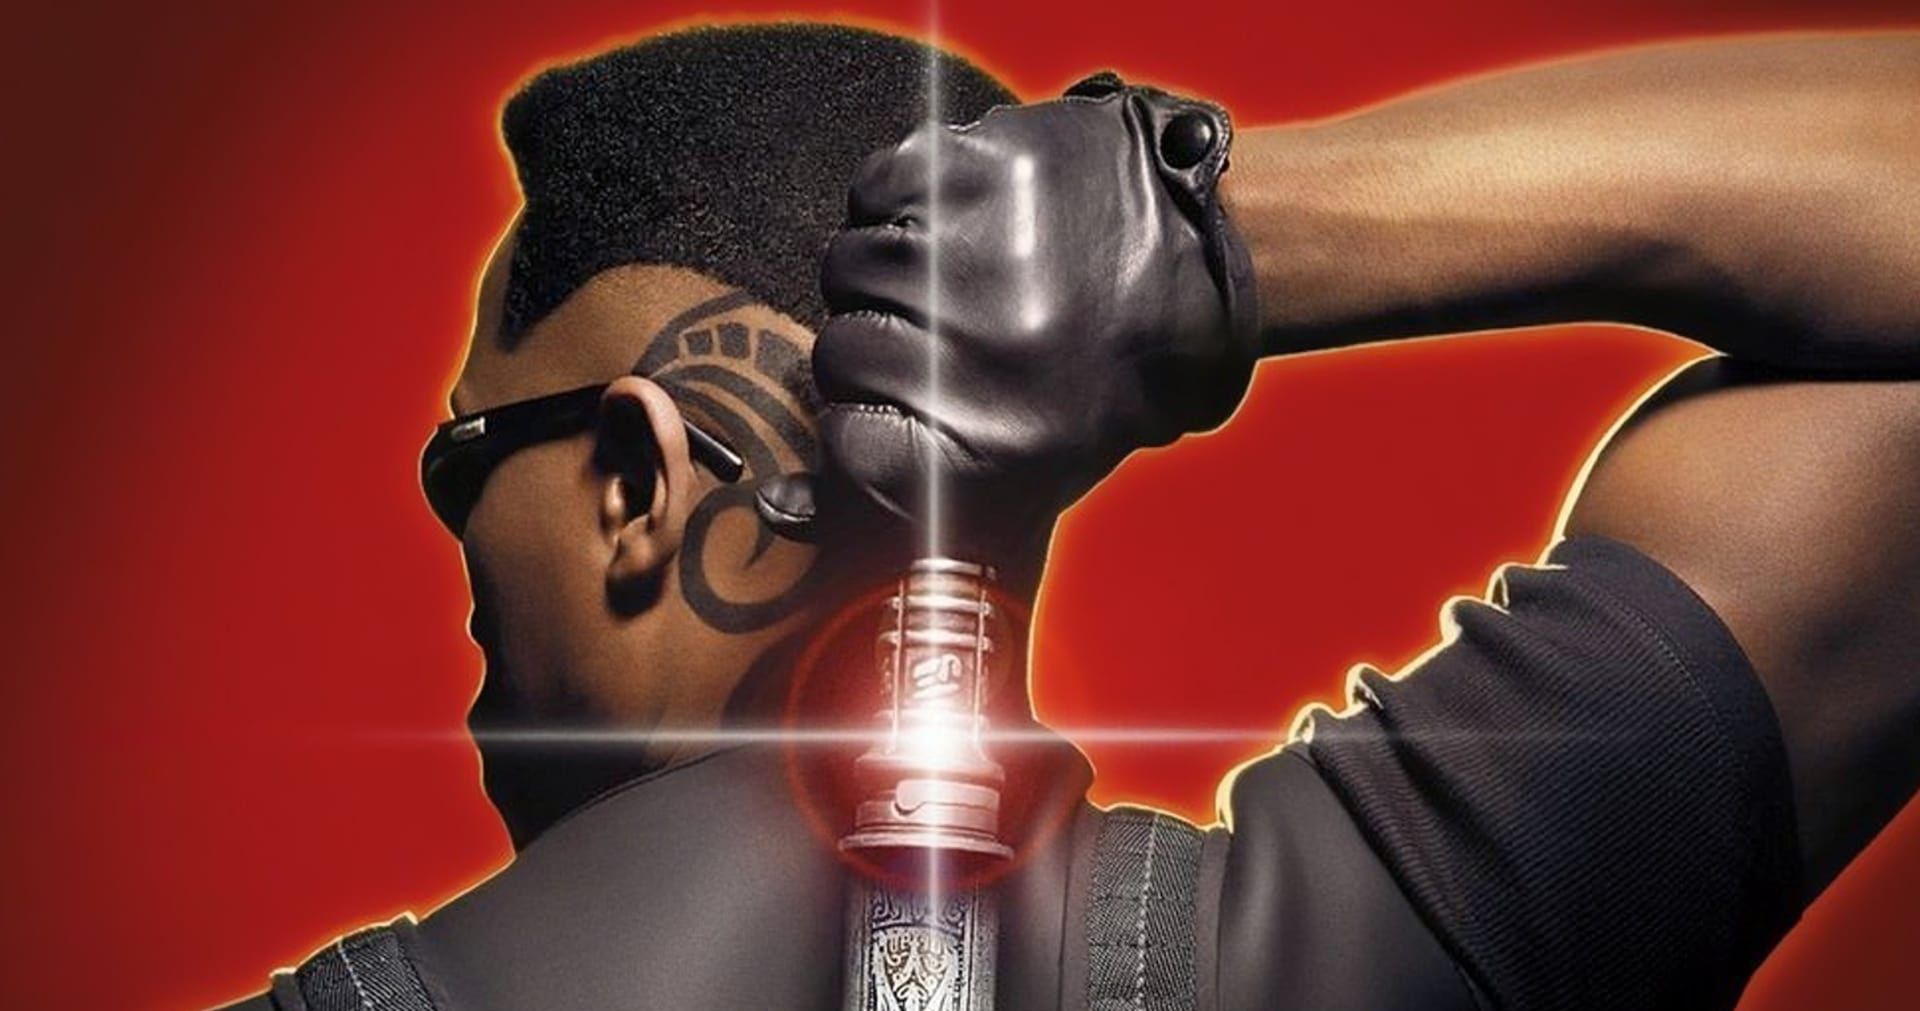 Blade Soundtrack Is Getting a Vinyl Release for the First Time